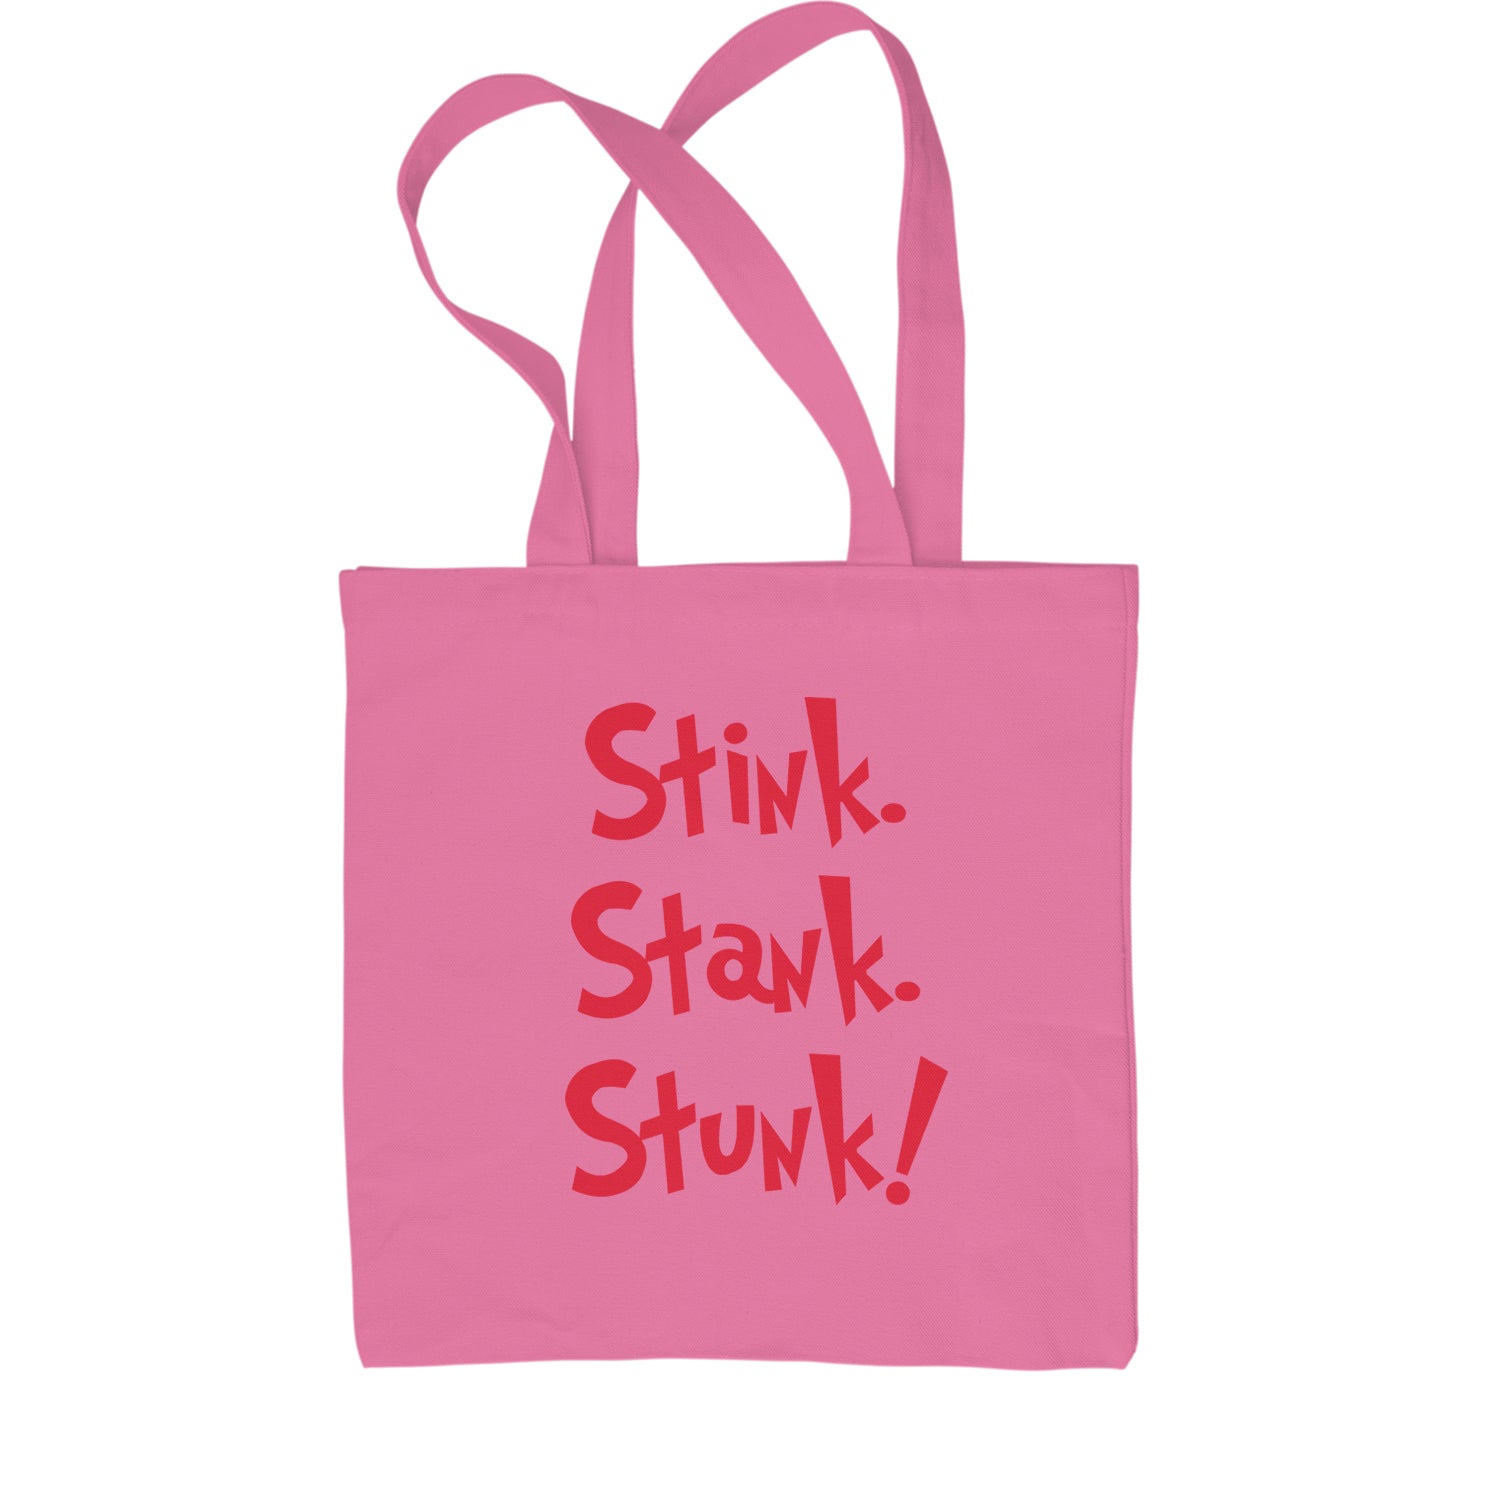 Stink Stank Stunk Grinch Shopping Tote Bag christmas, holiday, sweater, ugly, xmas by Expression Tees